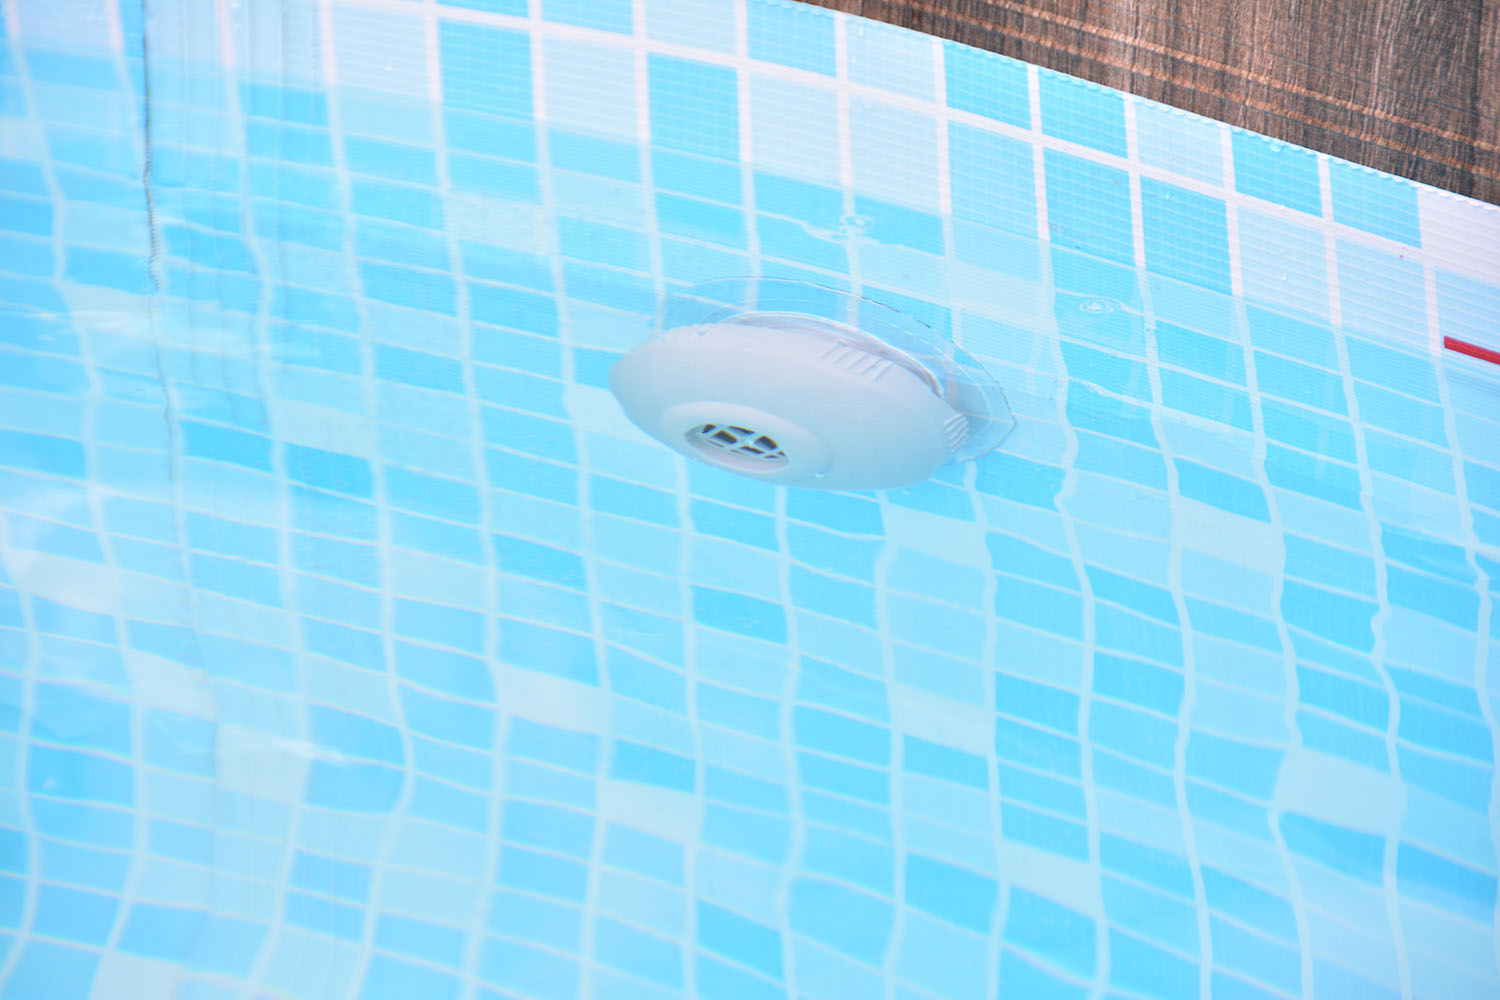 Avenli 10' x 30" Wood Pattern Premium Round Fiberglass Frame Above Ground Pool with Accessories - image 3 of 7